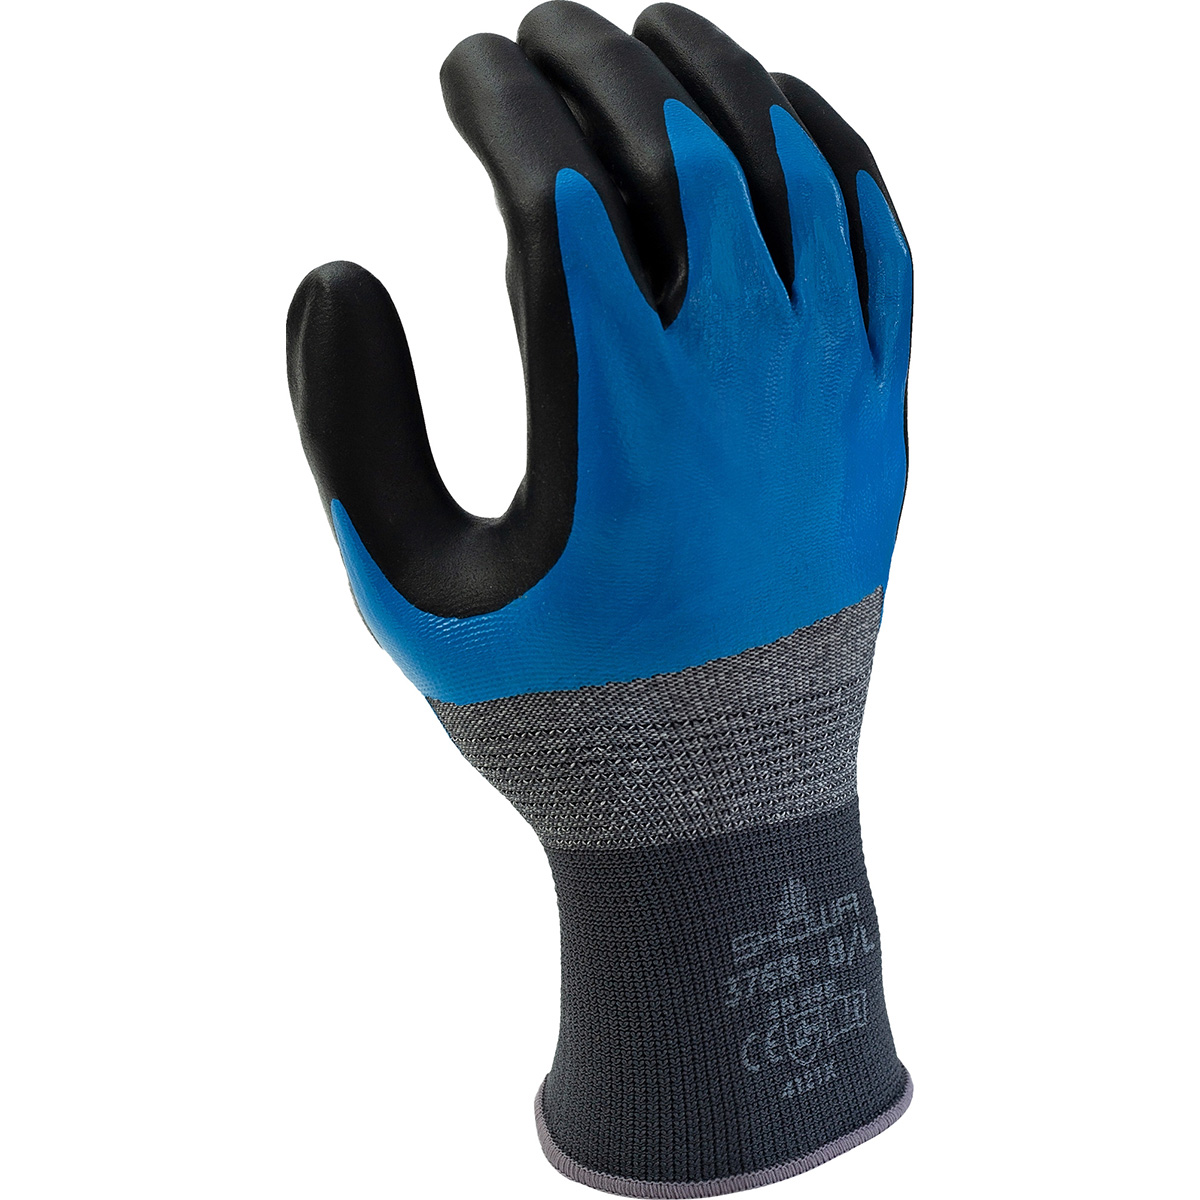 General purpose 3/4 nitrile blue undercoating w/black foamed palm coating, 13 gauge, 3/4 for over knuckle protection,  liquid resistant, seamless knitted liner, extra extra large